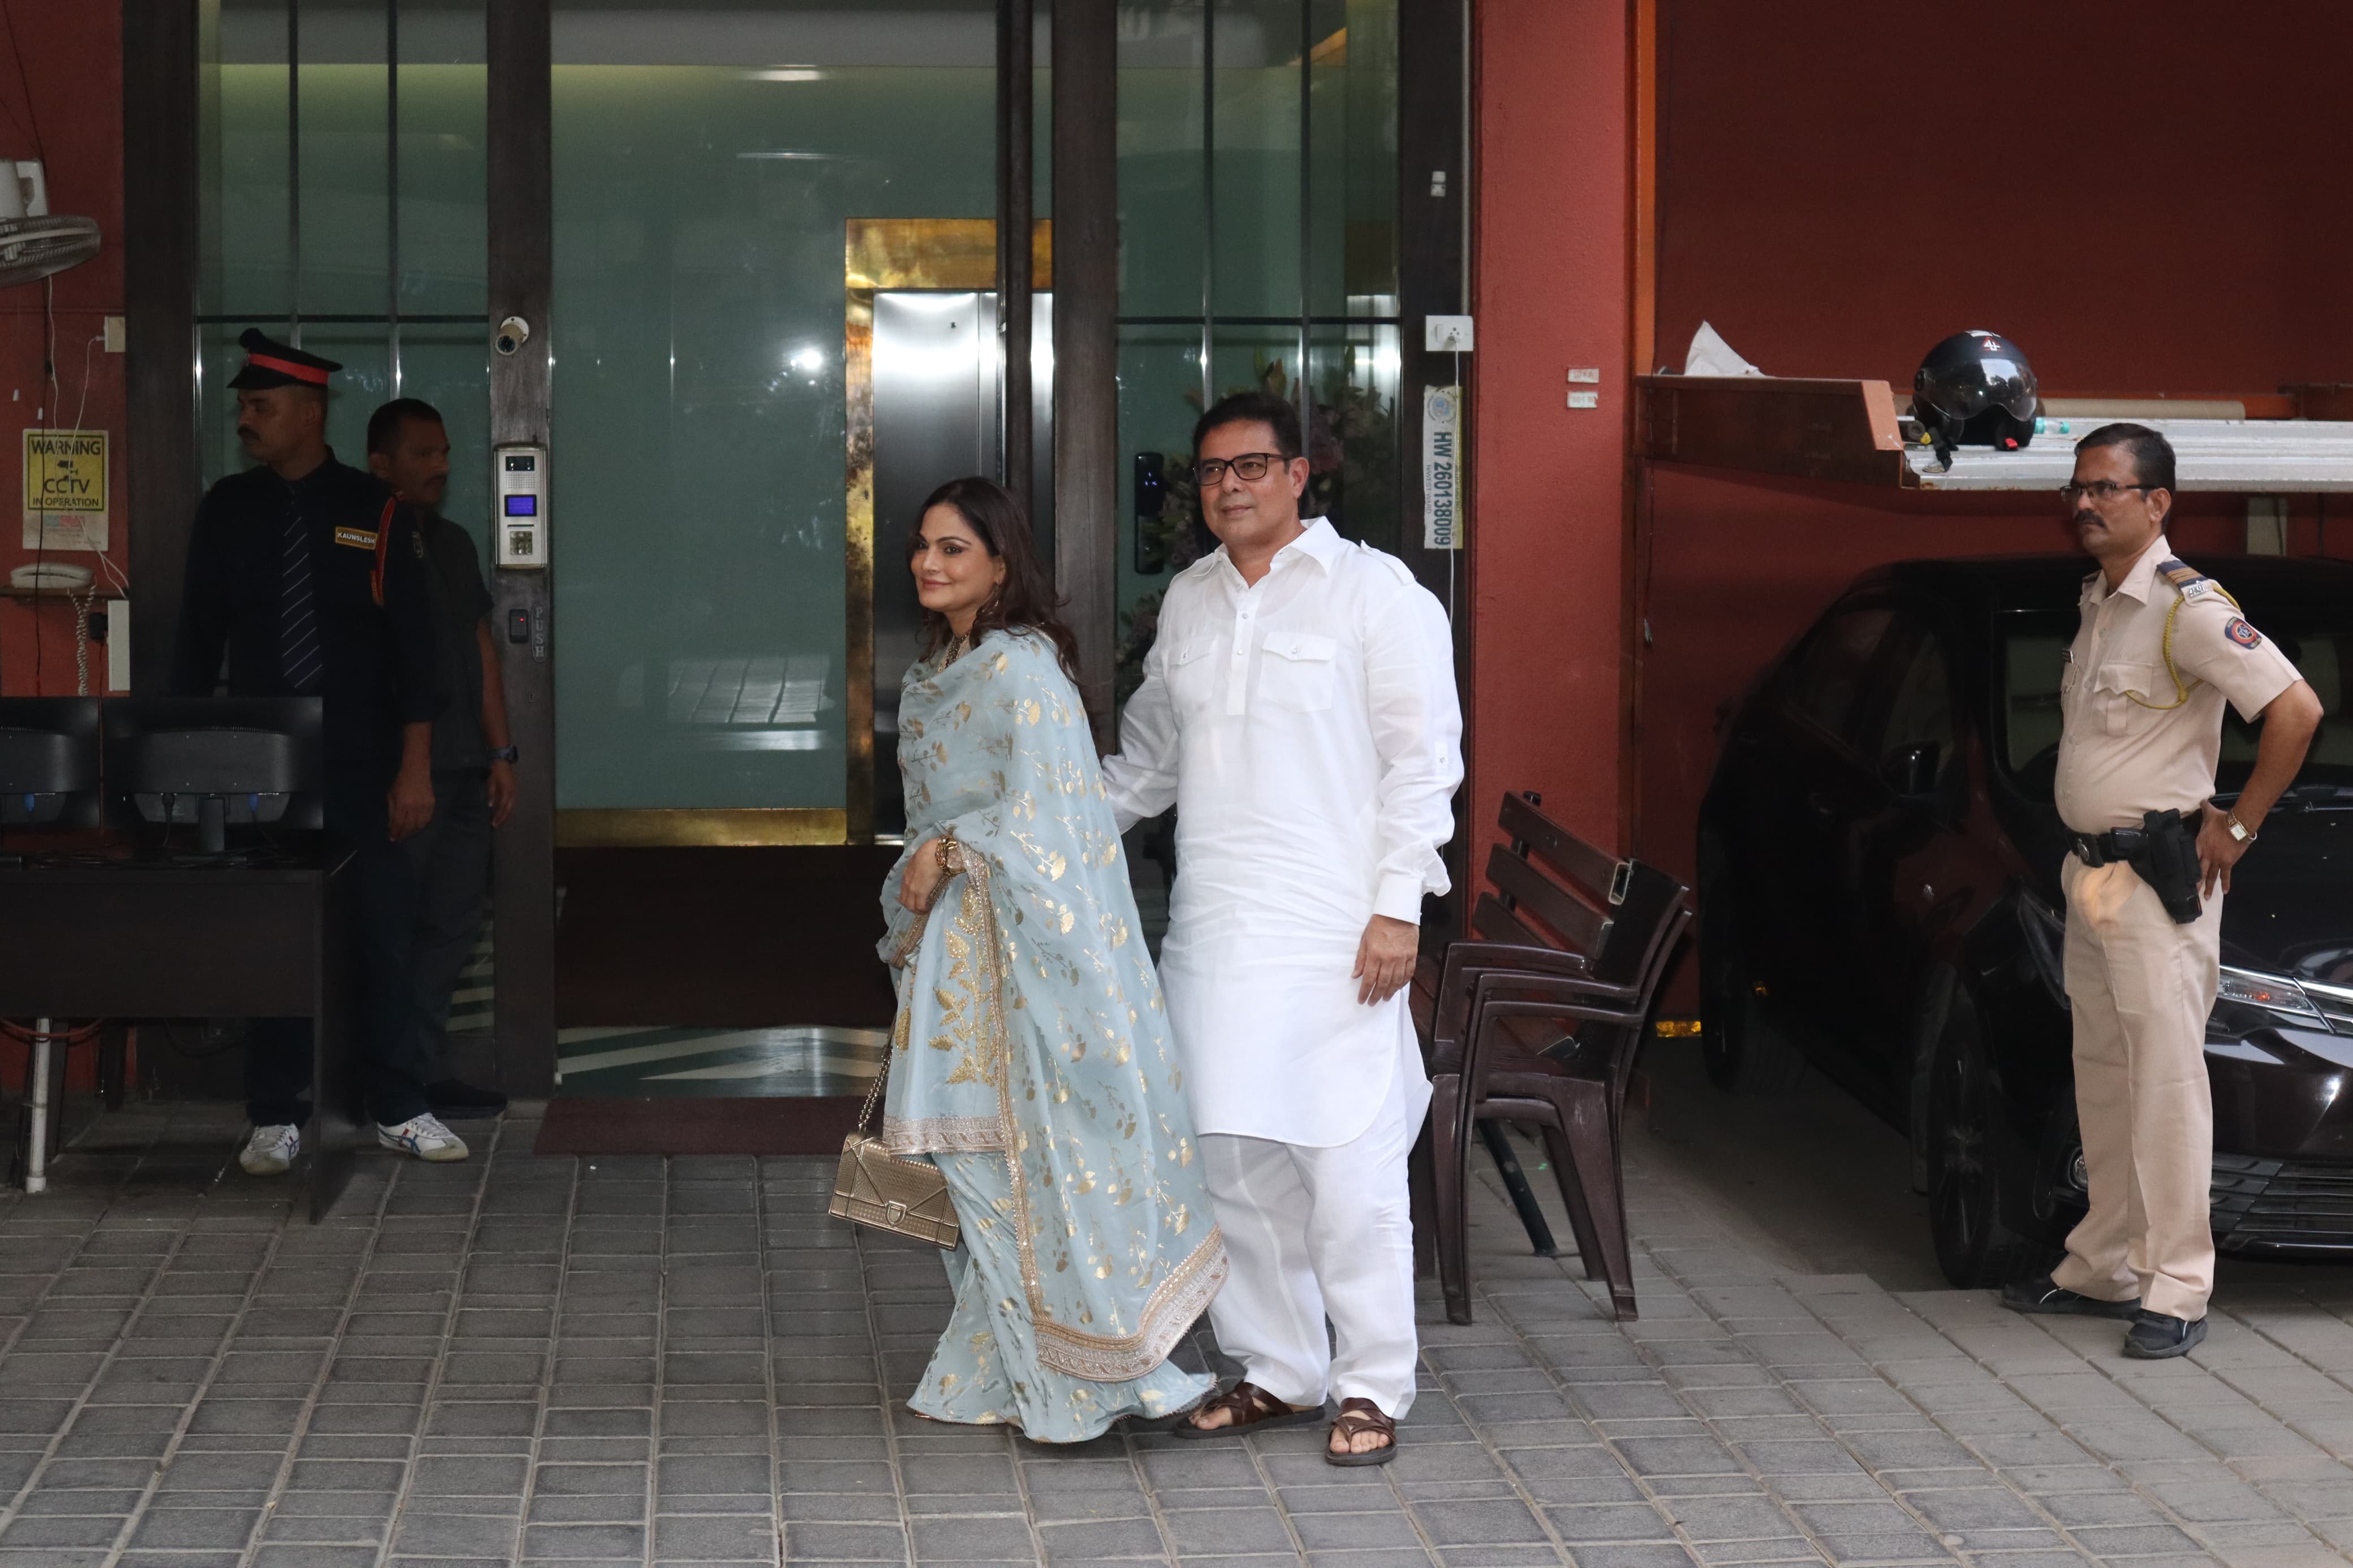 Atul Agnihotri and Alvira Khan Agnihotri walked hand-in-hand as they came to be a part of Arbaaz Khan's big day